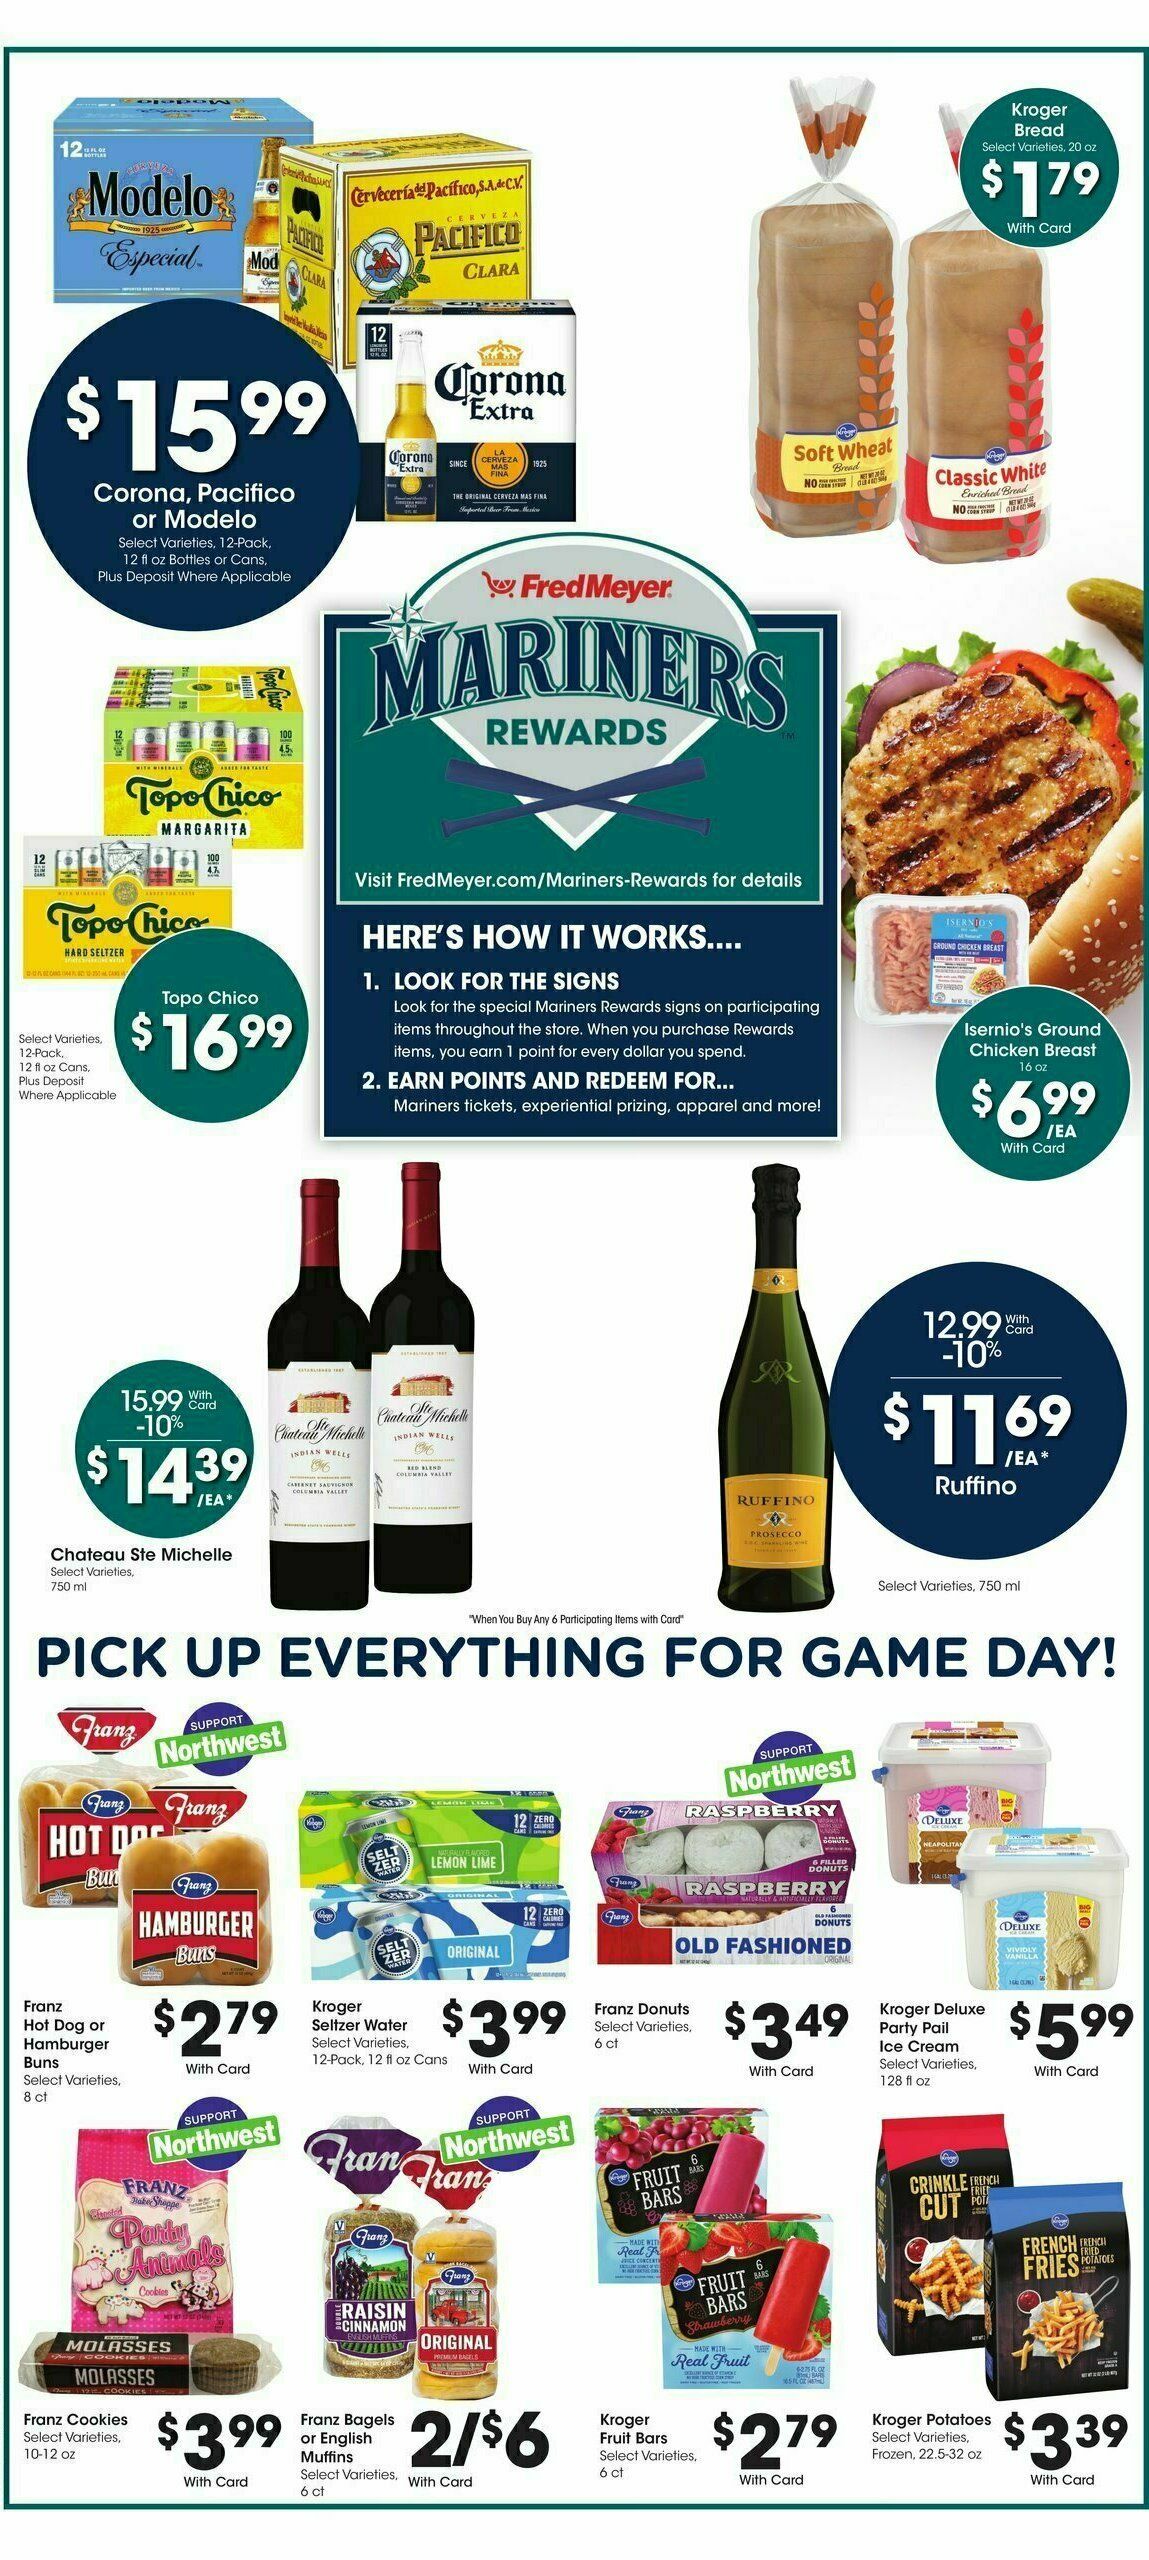 Fred Meyer Weekly Ad from July 5